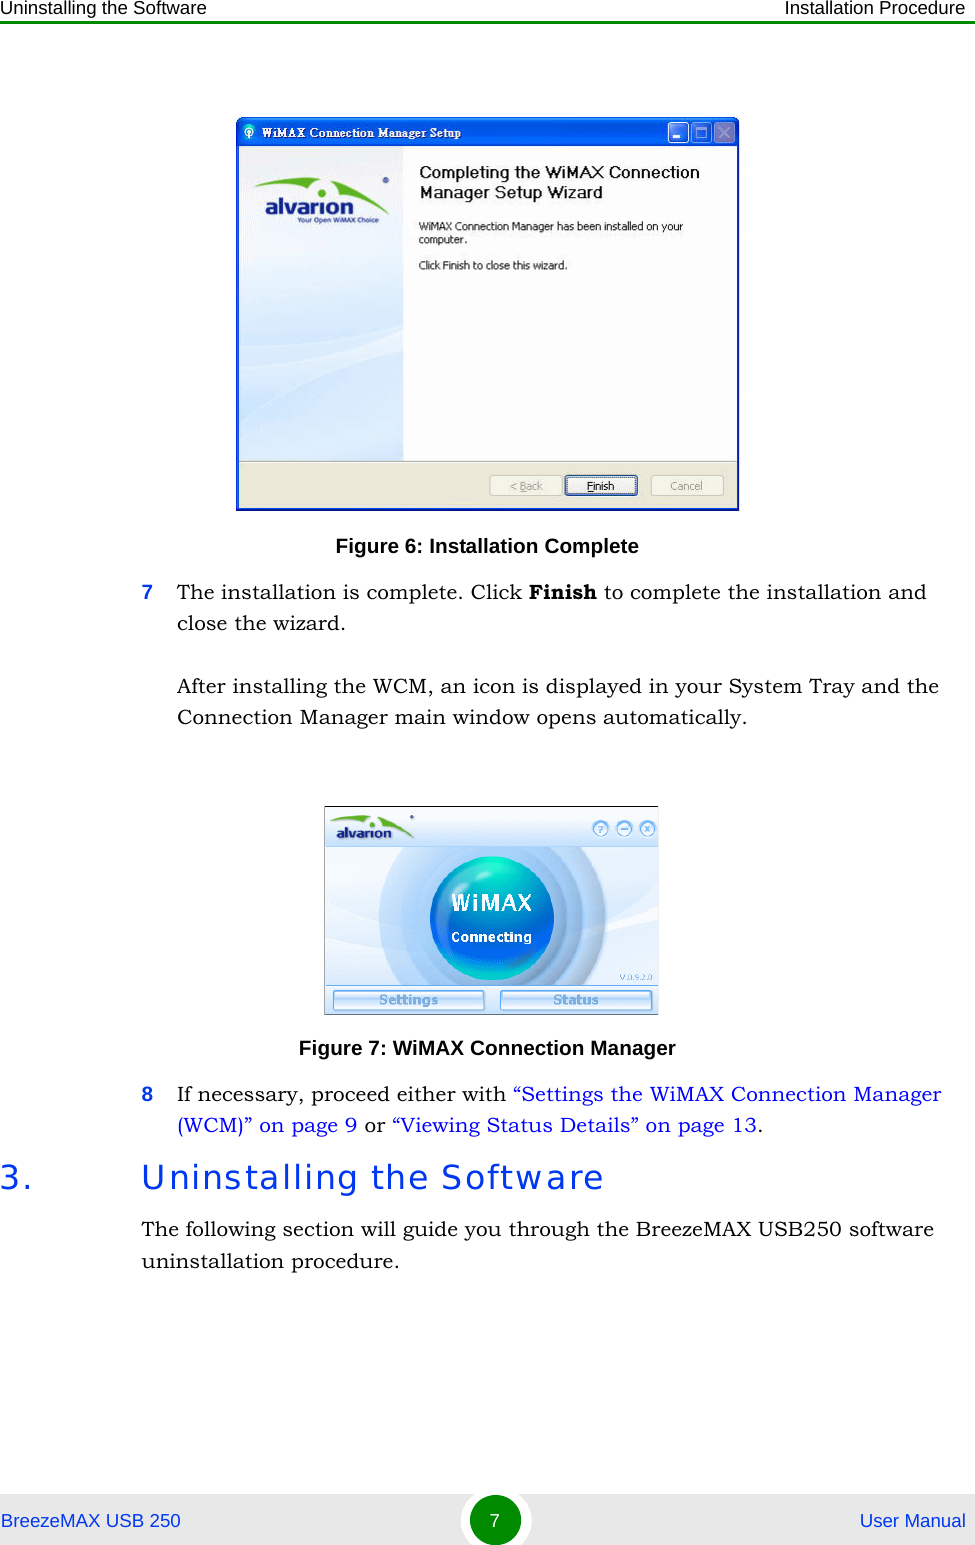 Uninstalling the Software Installation ProcedureBreezeMAX USB 250 7 User Manual7The installation is complete. Click Finish to complete the installation and close the wizard.After installing the WCM, an icon is displayed in your System Tray and the Connection Manager main window opens automatically.8If necessary, proceed either with “Settings the WiMAX Connection Manager (WCM)” on page 9 or “Viewing Status Details” on page 13.3. Uninstalling the SoftwareThe following section will guide you through the BreezeMAX USB250 software uninstallation procedure.Figure 6: Installation CompleteFigure 7: WiMAX Connection Manager 